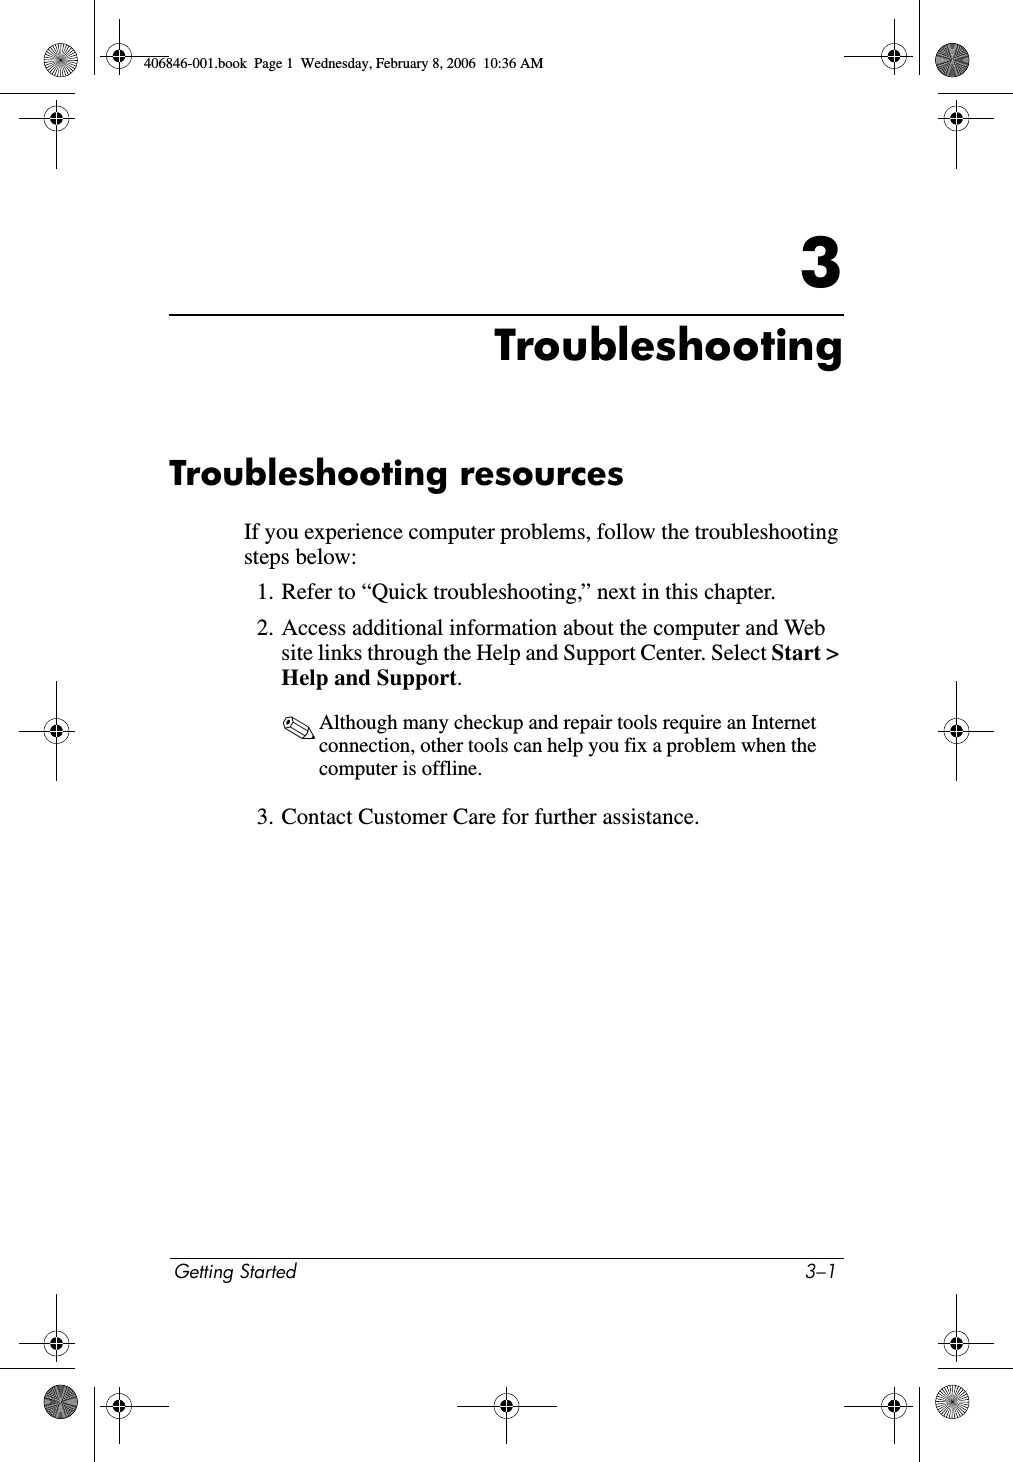 Getting Started 3–13TroubleshootingTroubleshooting resourcesIf you experience computer problems, follow the troubleshooting steps below:1. Refer to “Quick troubleshooting,” next in this chapter.2. Access additional information about the computer and Web site links through the Help and Support Center. Select Start &gt; Help and Support.✎Although many checkup and repair tools require an Internet connection, other tools can help you fix a problem when the computer is offline.3. Contact Customer Care for further assistance.406846-001.book  Page 1  Wednesday, February 8, 2006  10:36 AM